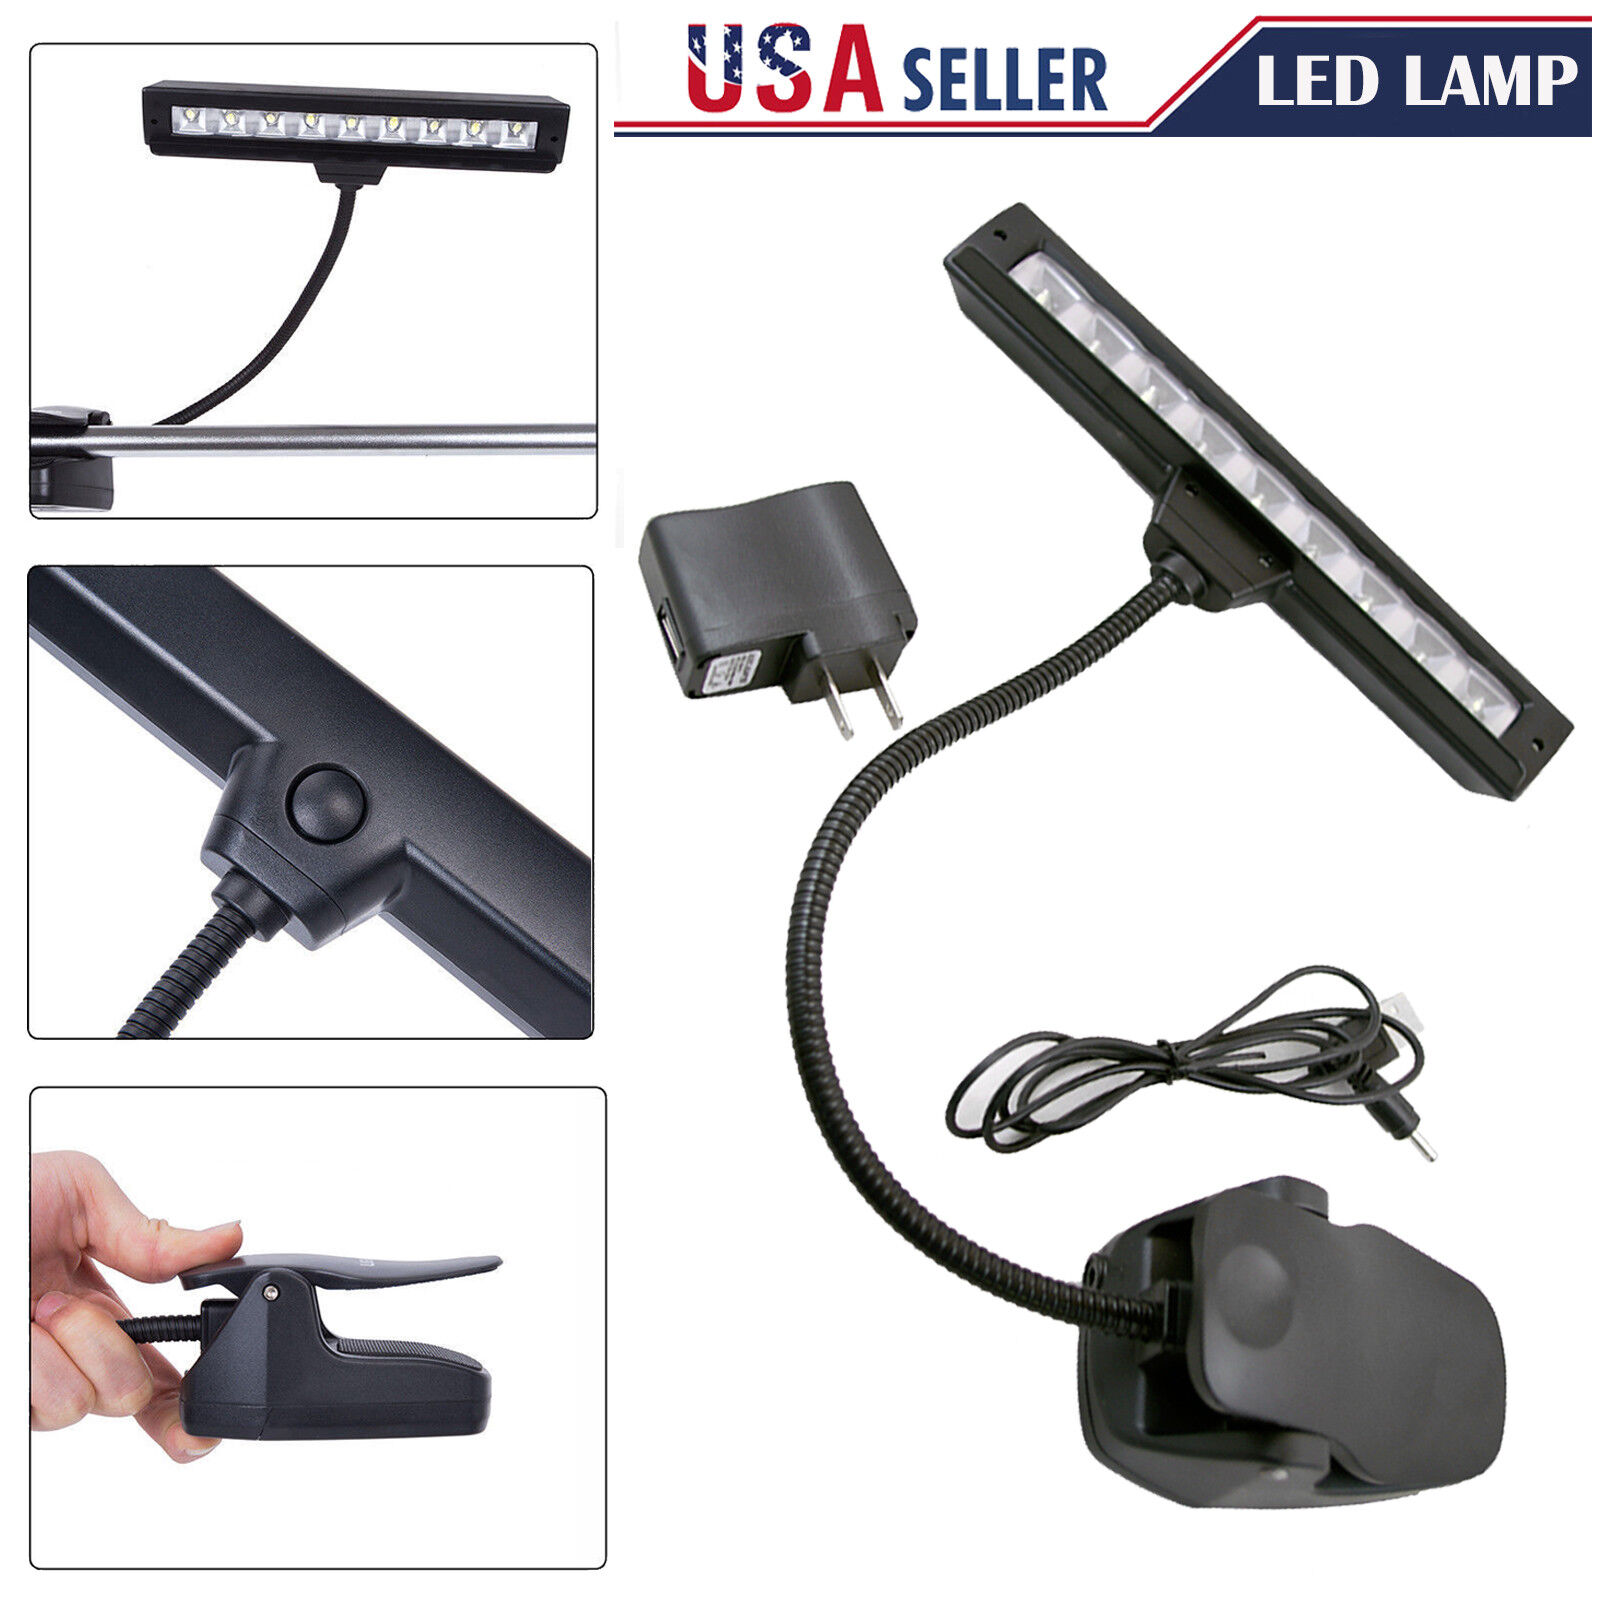 Lamp Light Black Flexible 9 LEDs Clip-On Orchestra Music Stand With Adapter Unbranded/Generic Does Not Apply - фотография #12